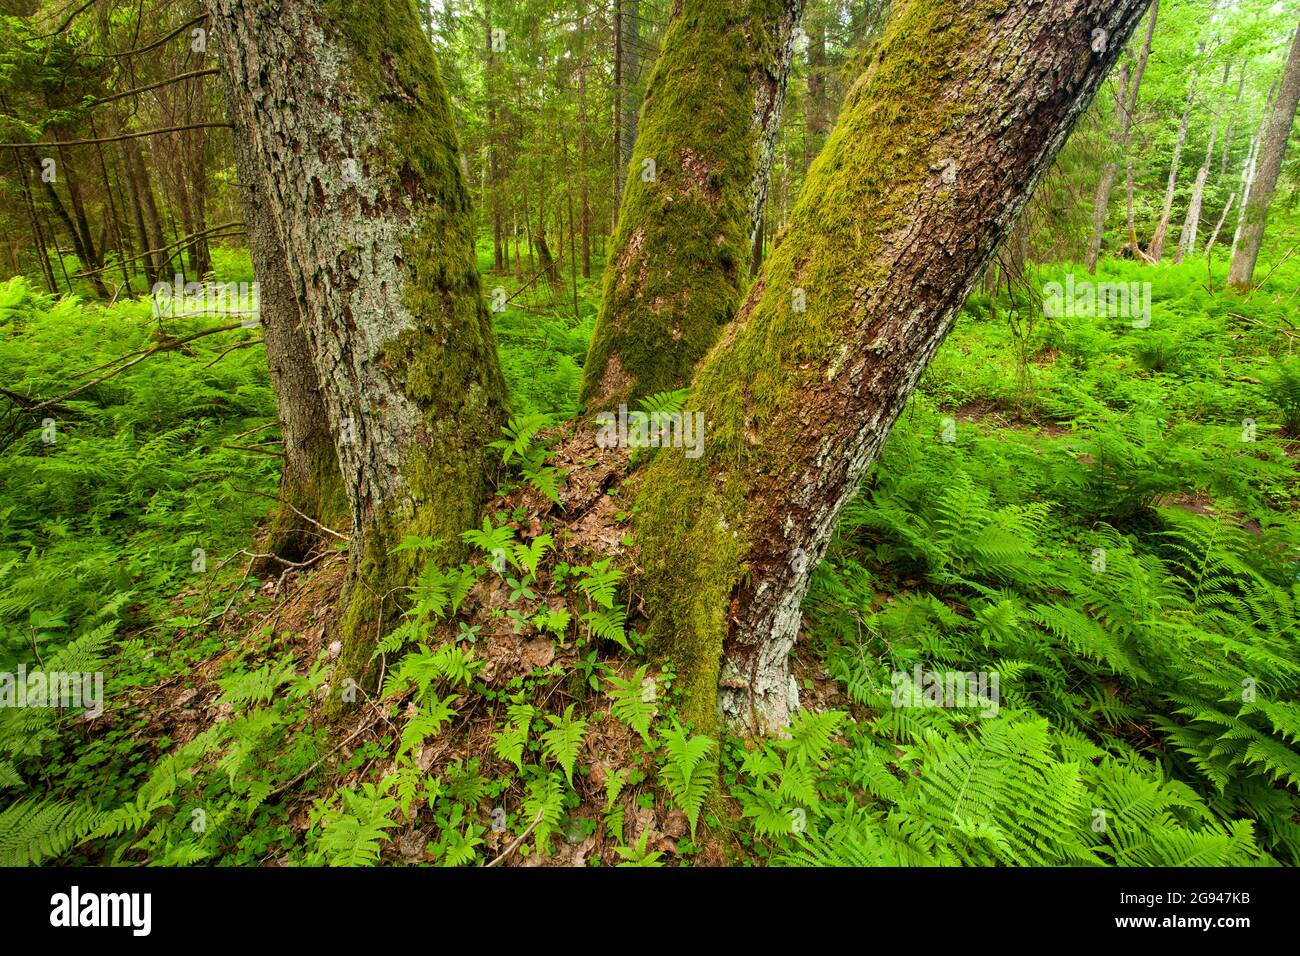 Several trees covered with moss and young ferns in an old-growth forest in Estonia, Northern Europe. Stock Photo